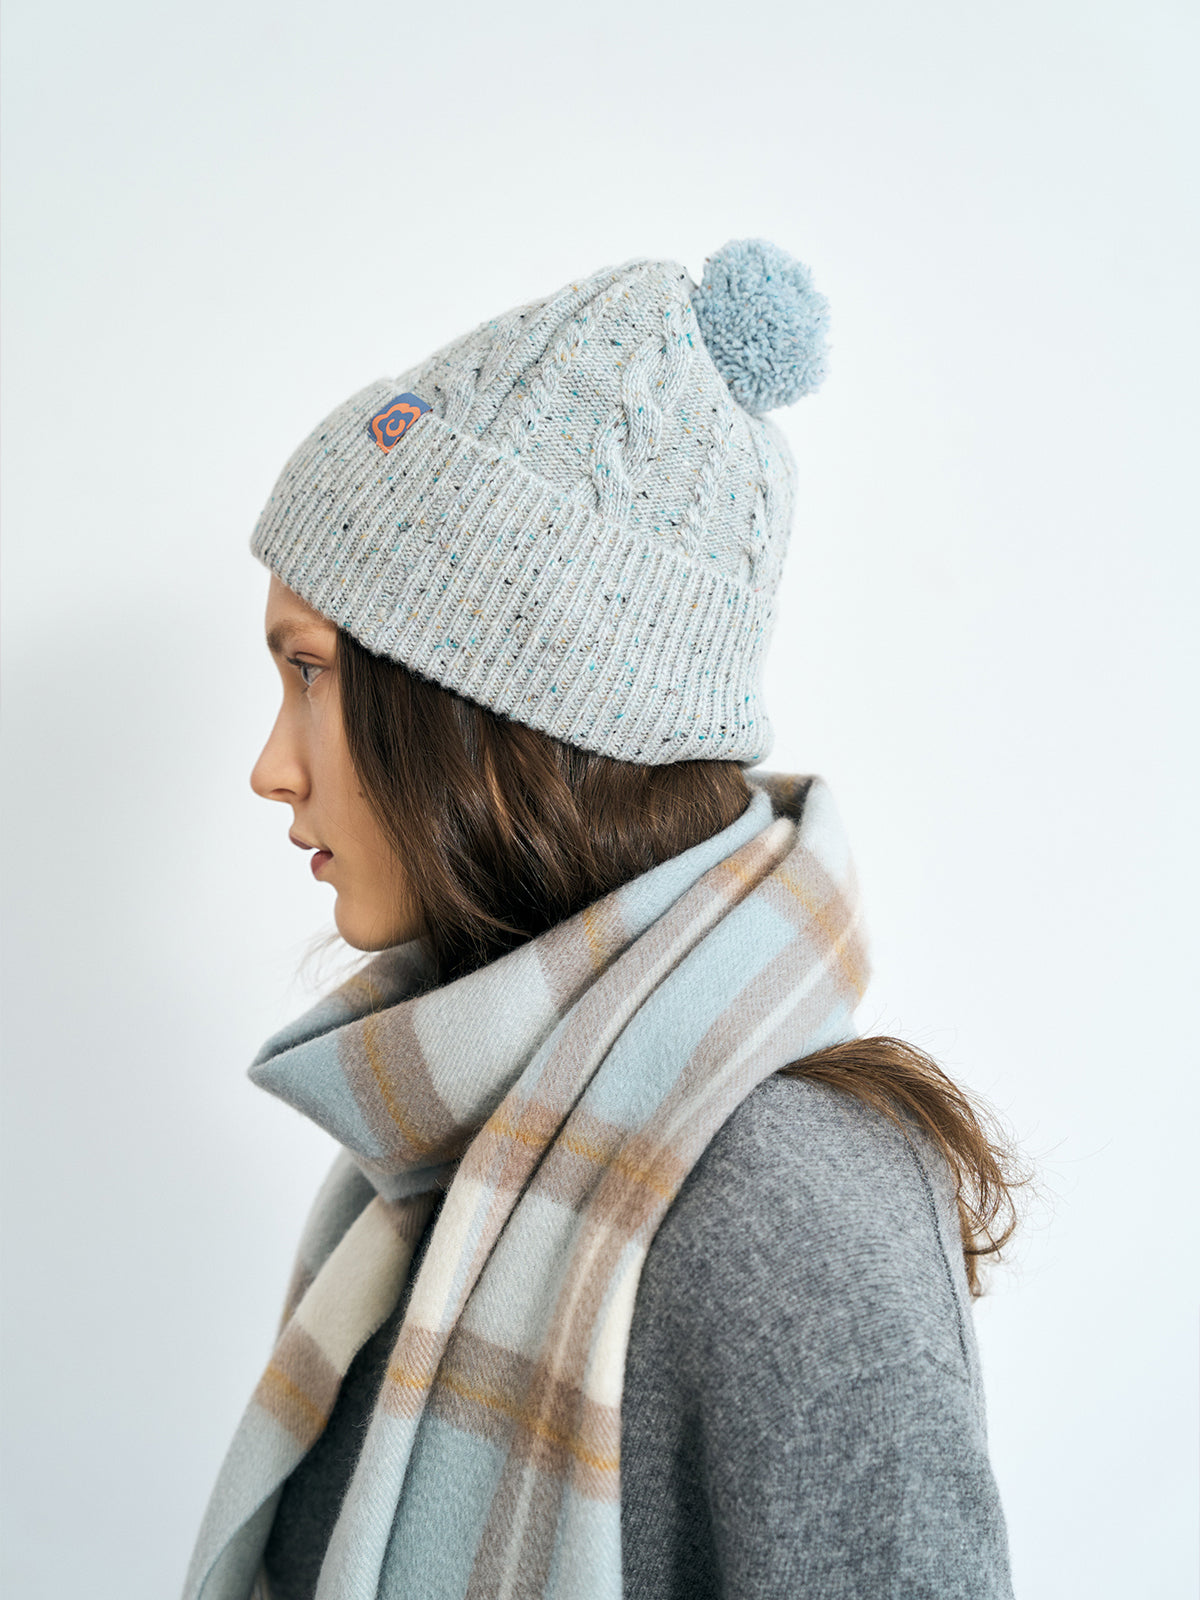 "Pom Pom" Cable Knit Wool Beanie Hat - Icy Blue